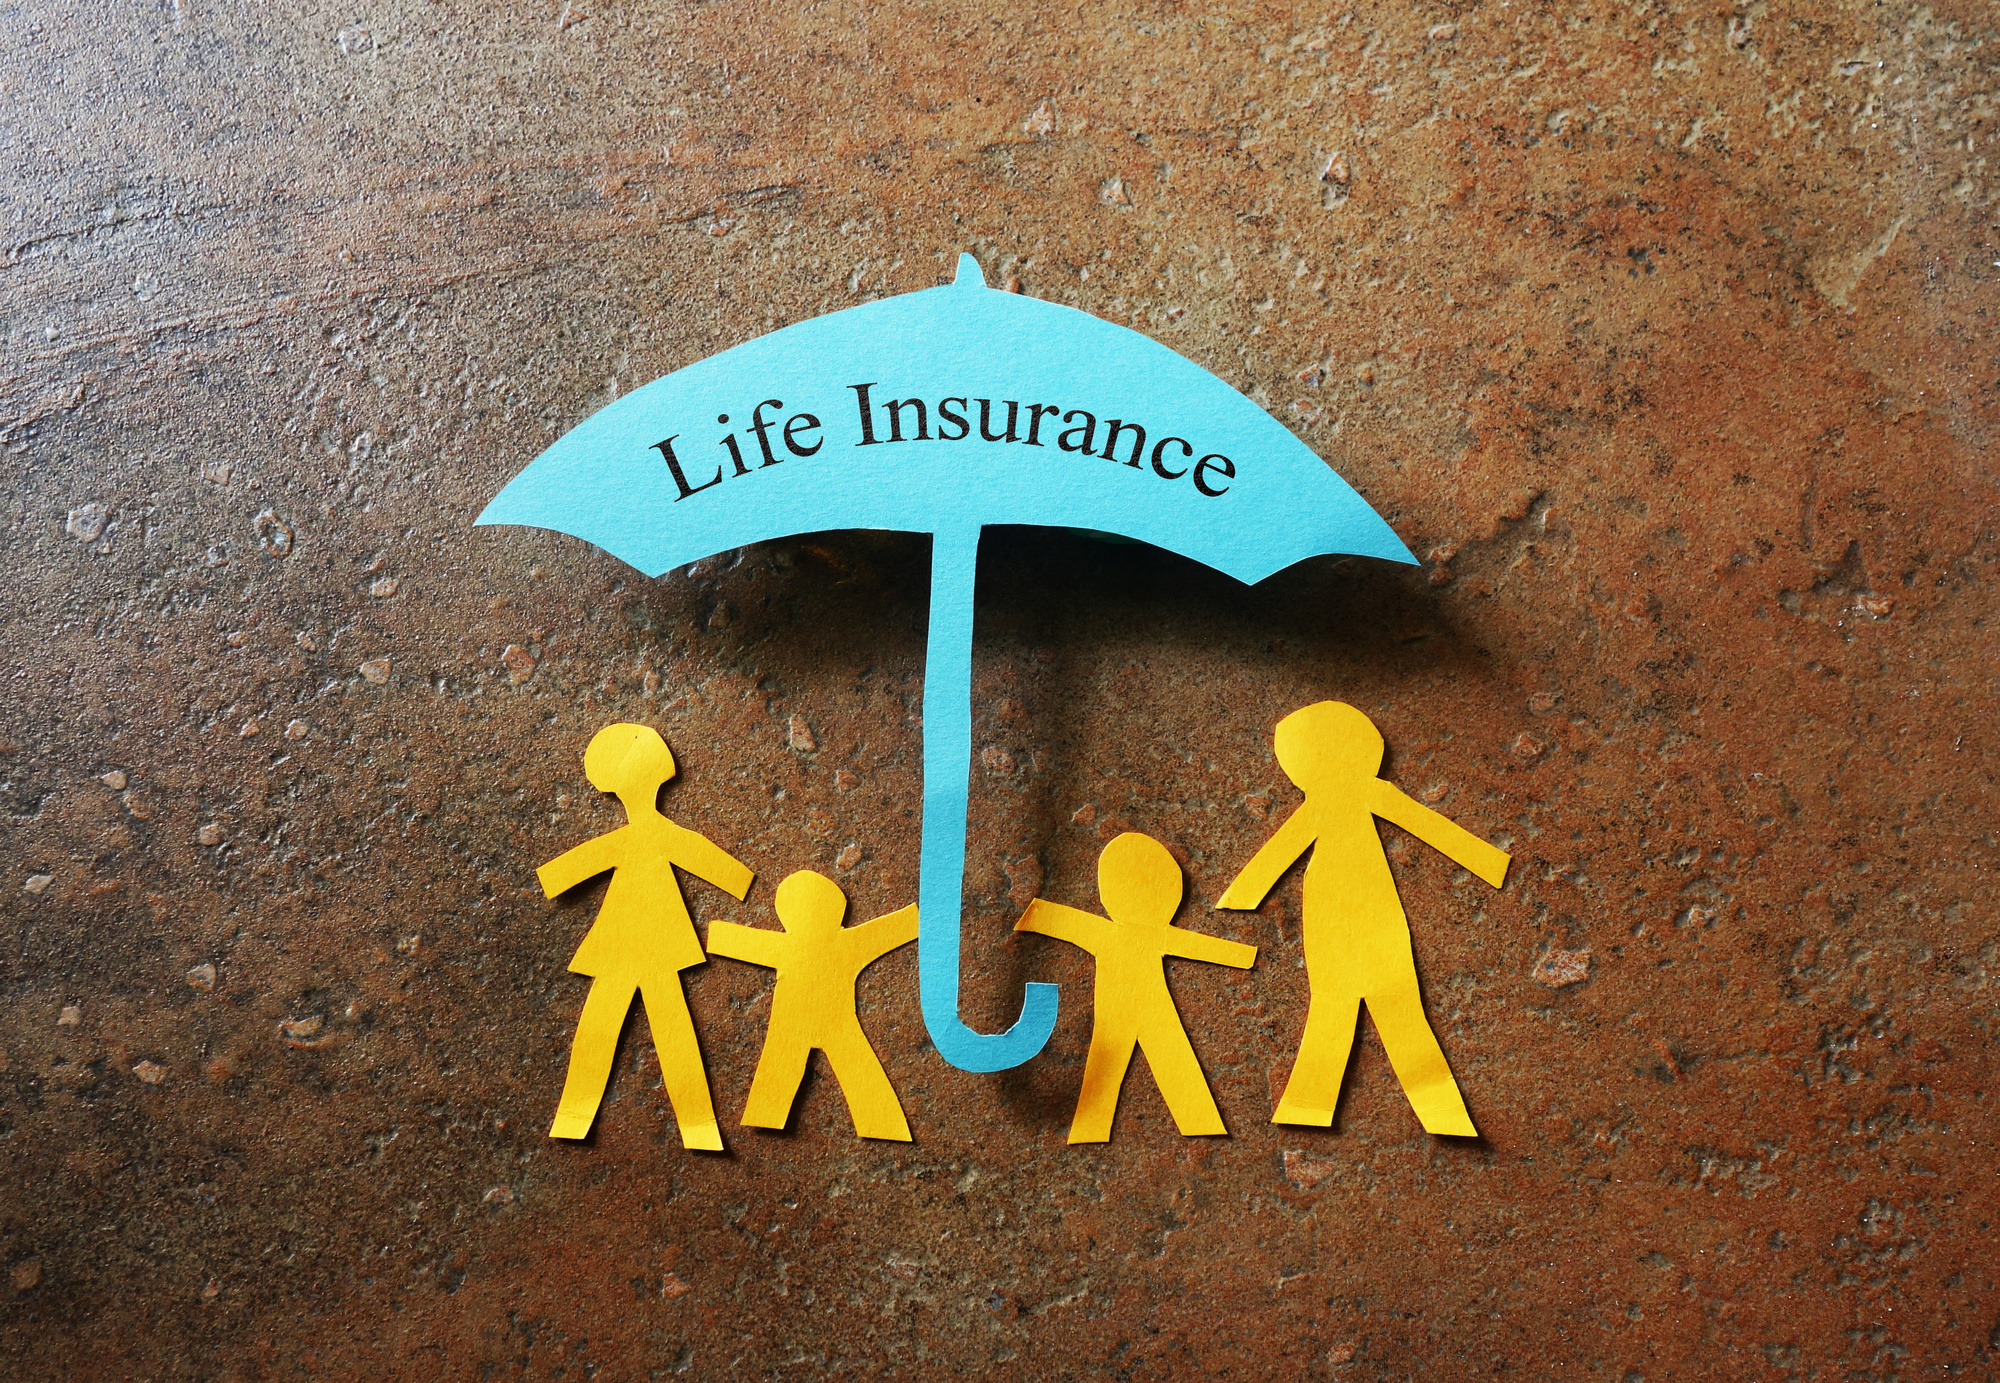 Is a children's life insurance policy a smart financial move for your child? We explain the key pros and cons to consider to help you decide.